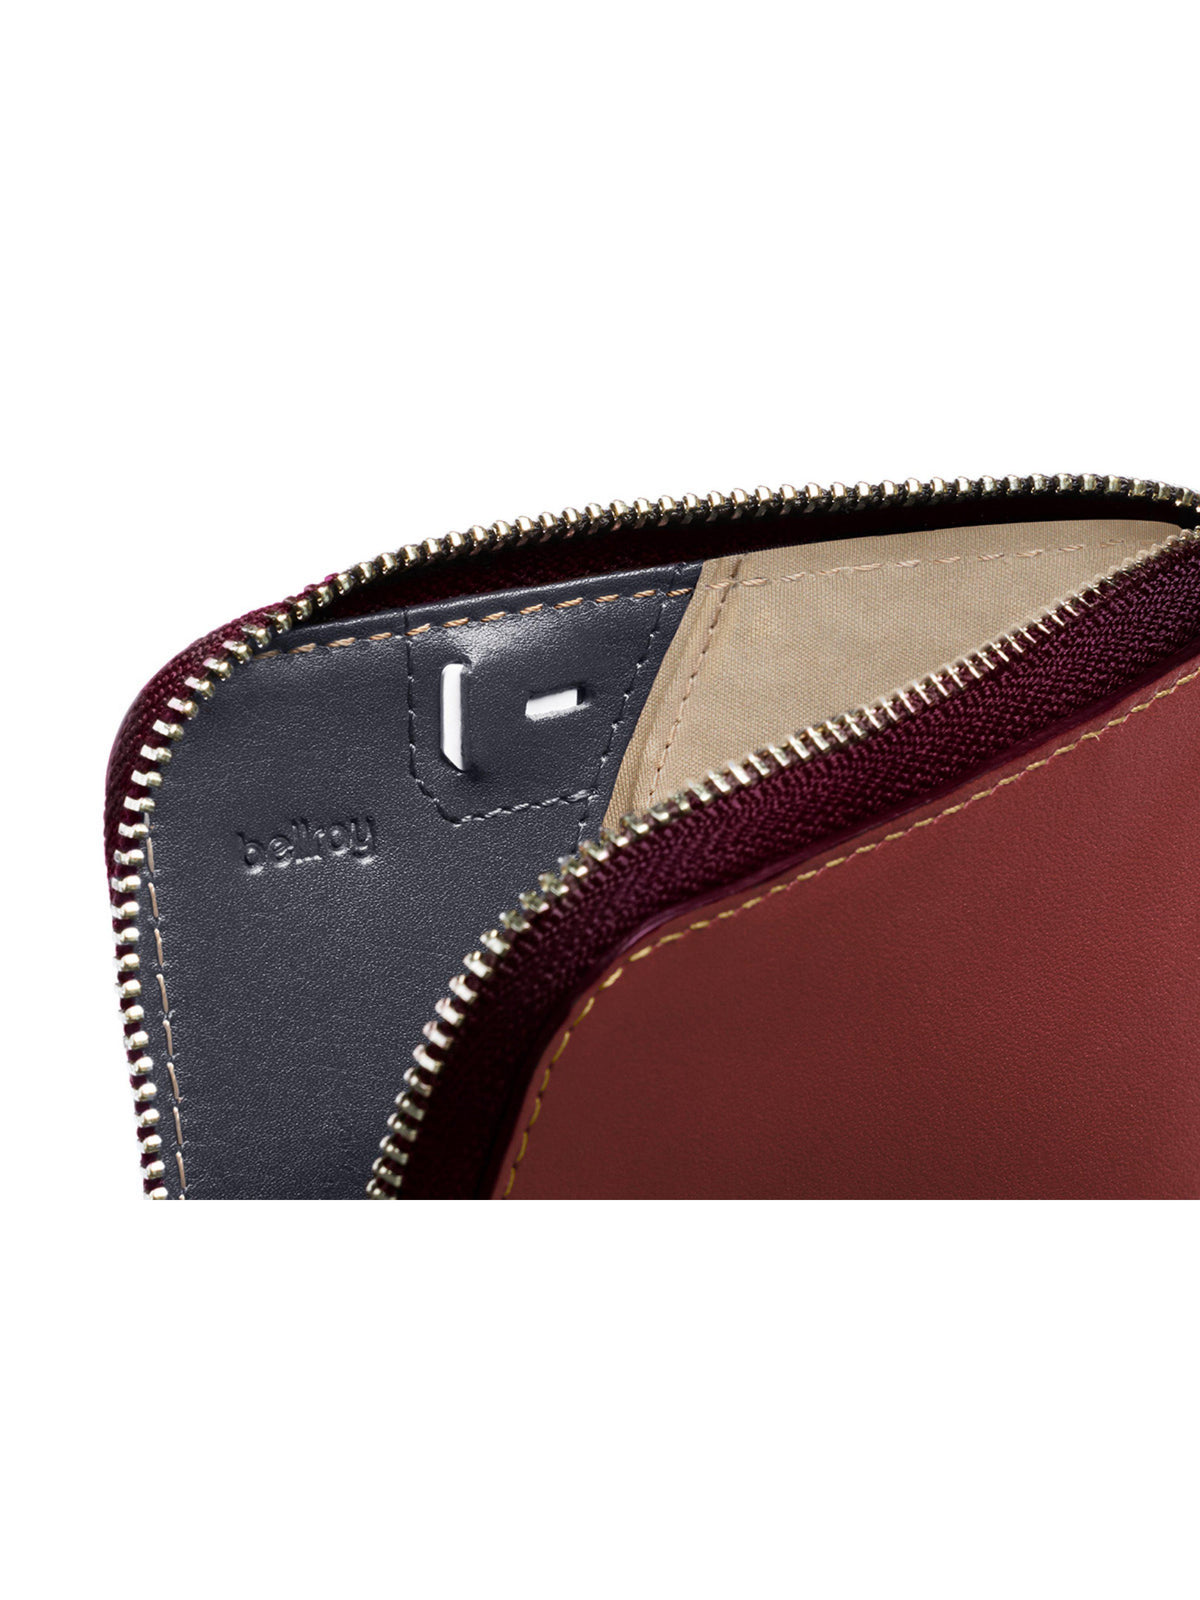 Bellroy Card Pocket Red Earth